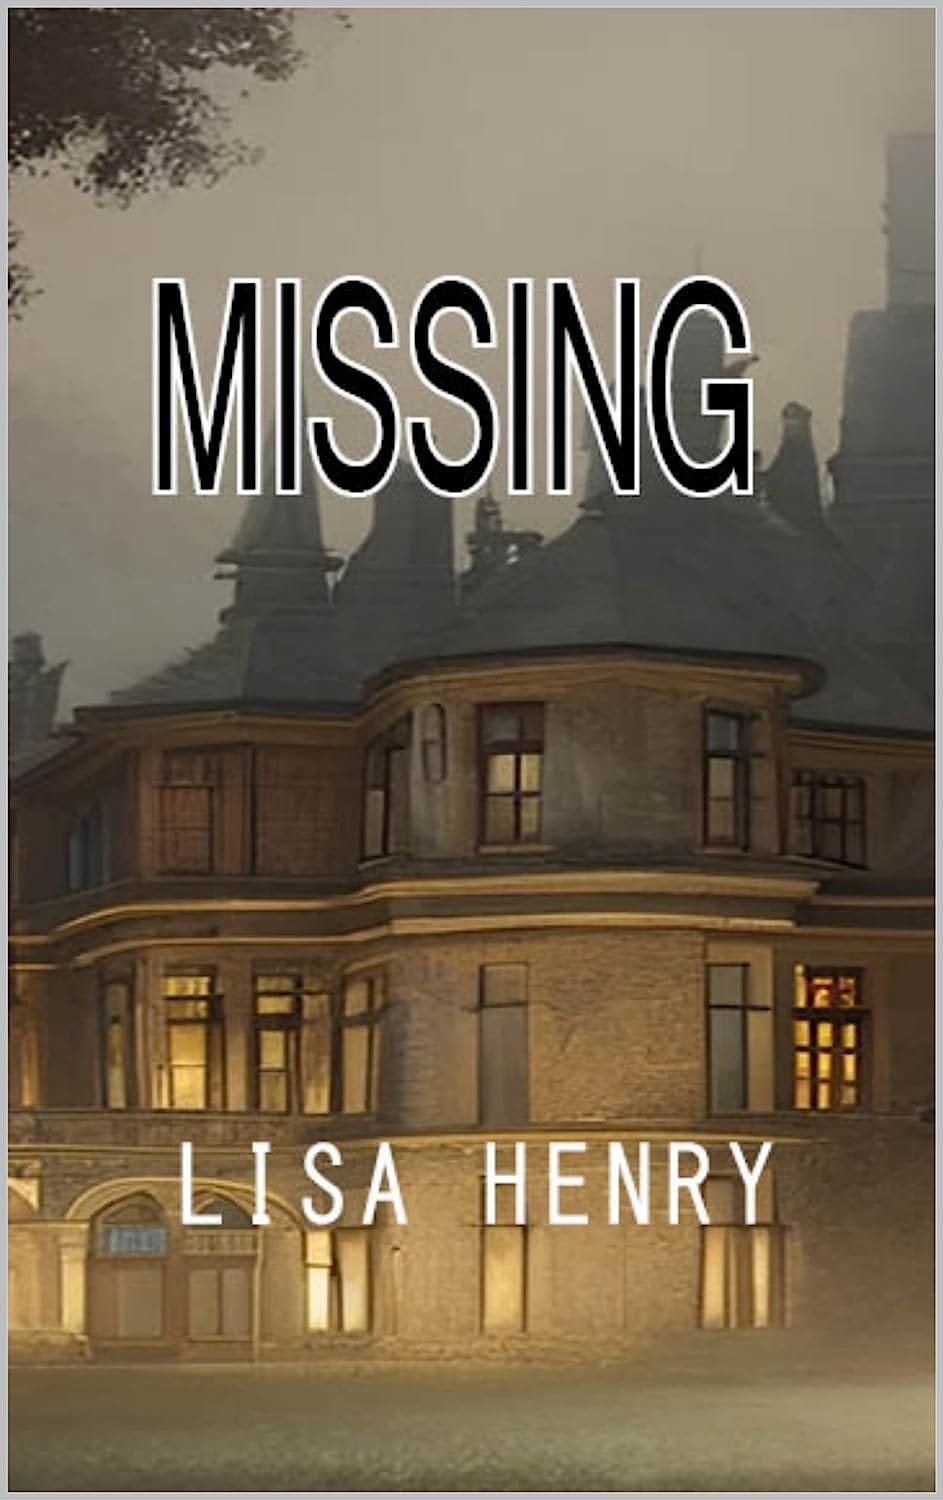 Book cover of Missing by Lisa Henry, showing a creepy building with lit-up windows.